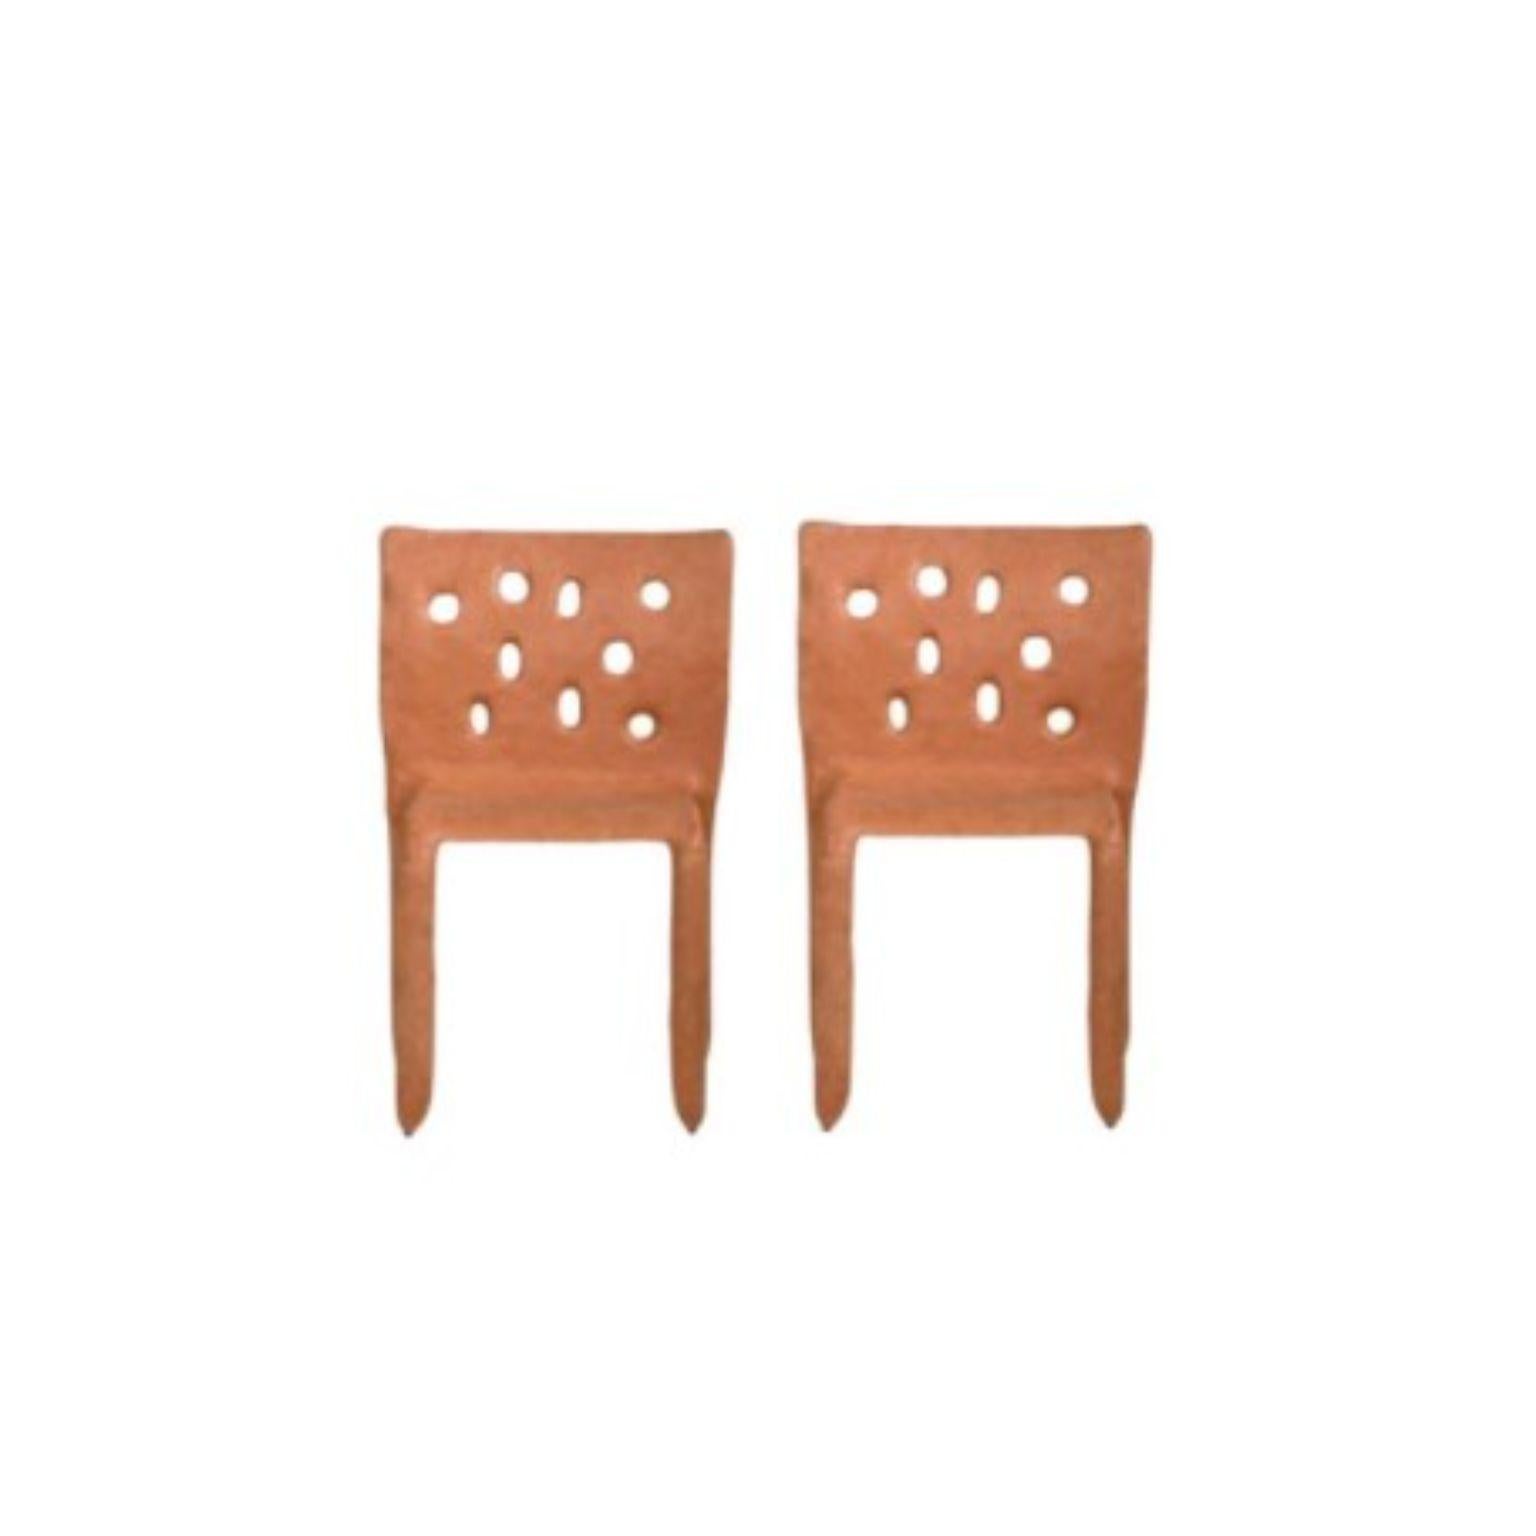 Set of 2 orange sculpted contemporary chairs by Faina
Design: Victoriya Yakusha
Material: steel, flax rubber, biopolymer, cellulose
Dimensions: Height 82 x width 54 x legs depth 45 cm
Weight: 15 kilos.

Indoor finish available

Made in the style of